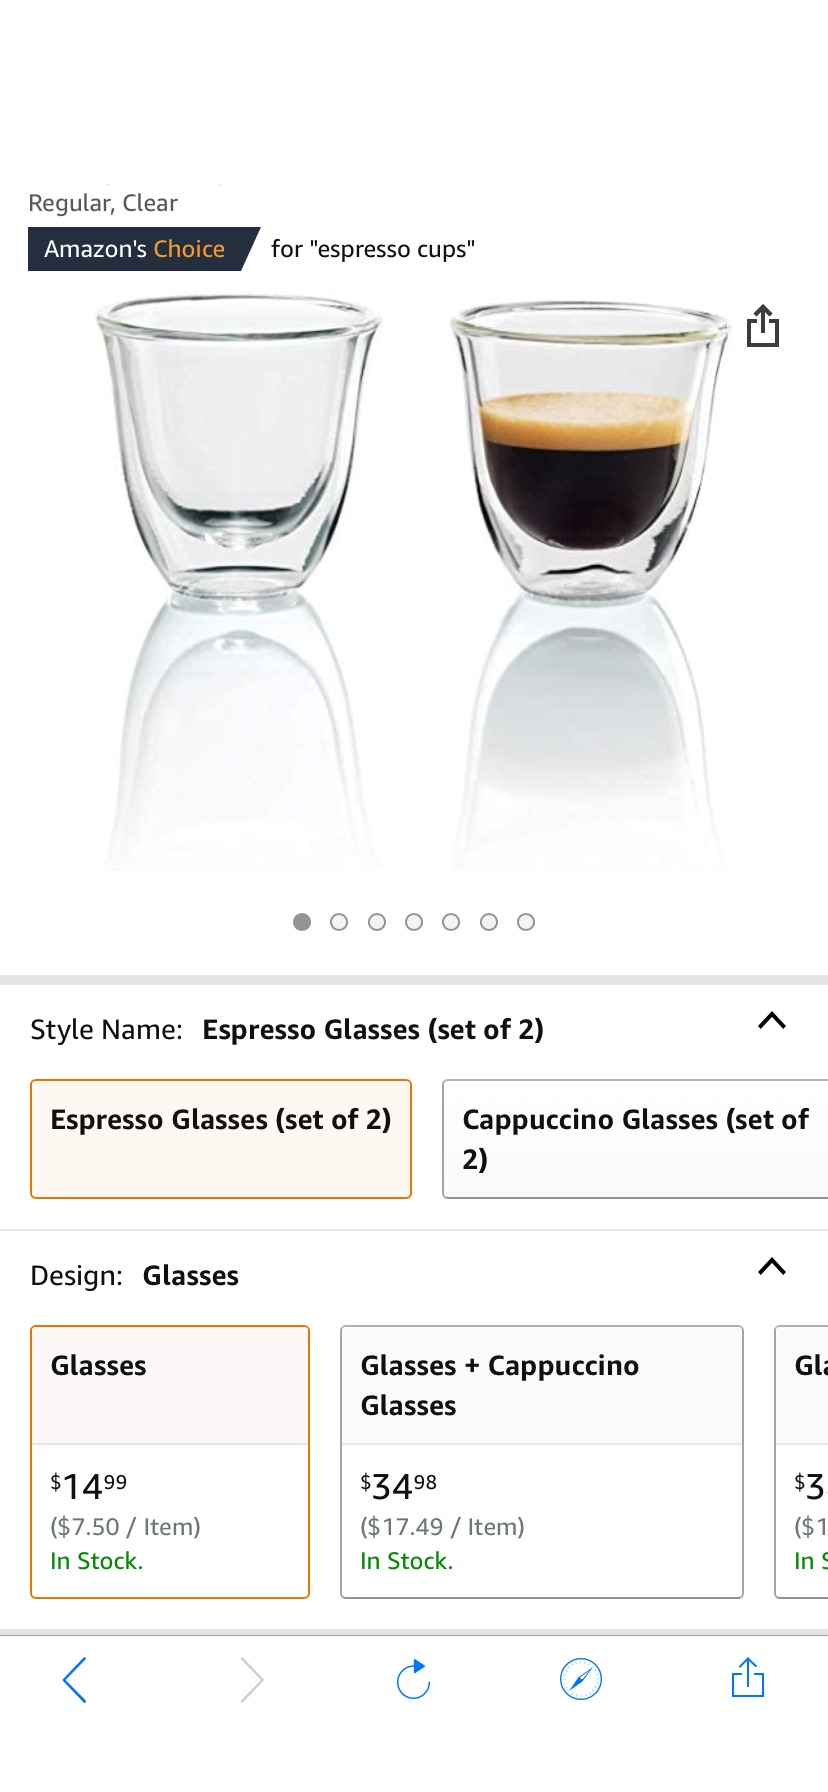 Amazon.com: De'Longhi DeLonghi Double 玻璃板2个Walled Thermo Espresso Glasses, Set of 2, Regular, Clear: Combination Coffee Espresso Machines: Kitchen & Dining